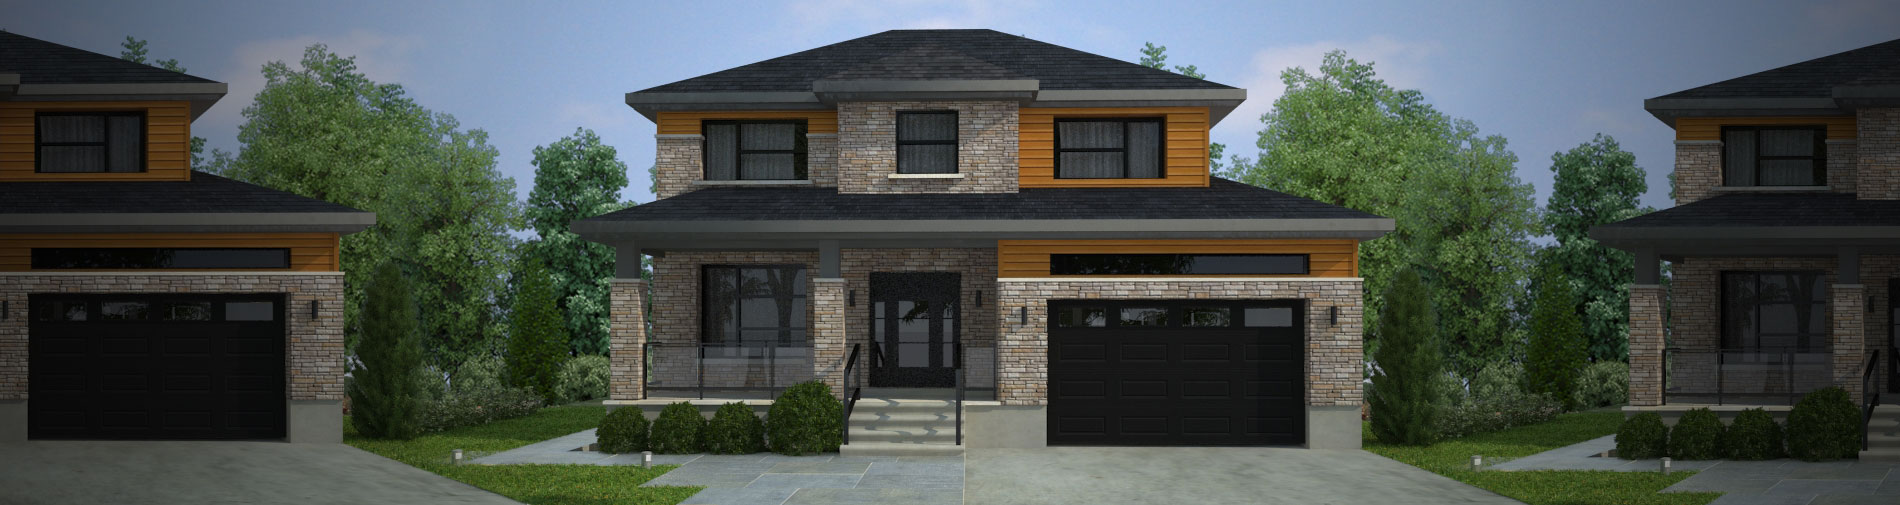 The biggest residential projet of eastern ontario